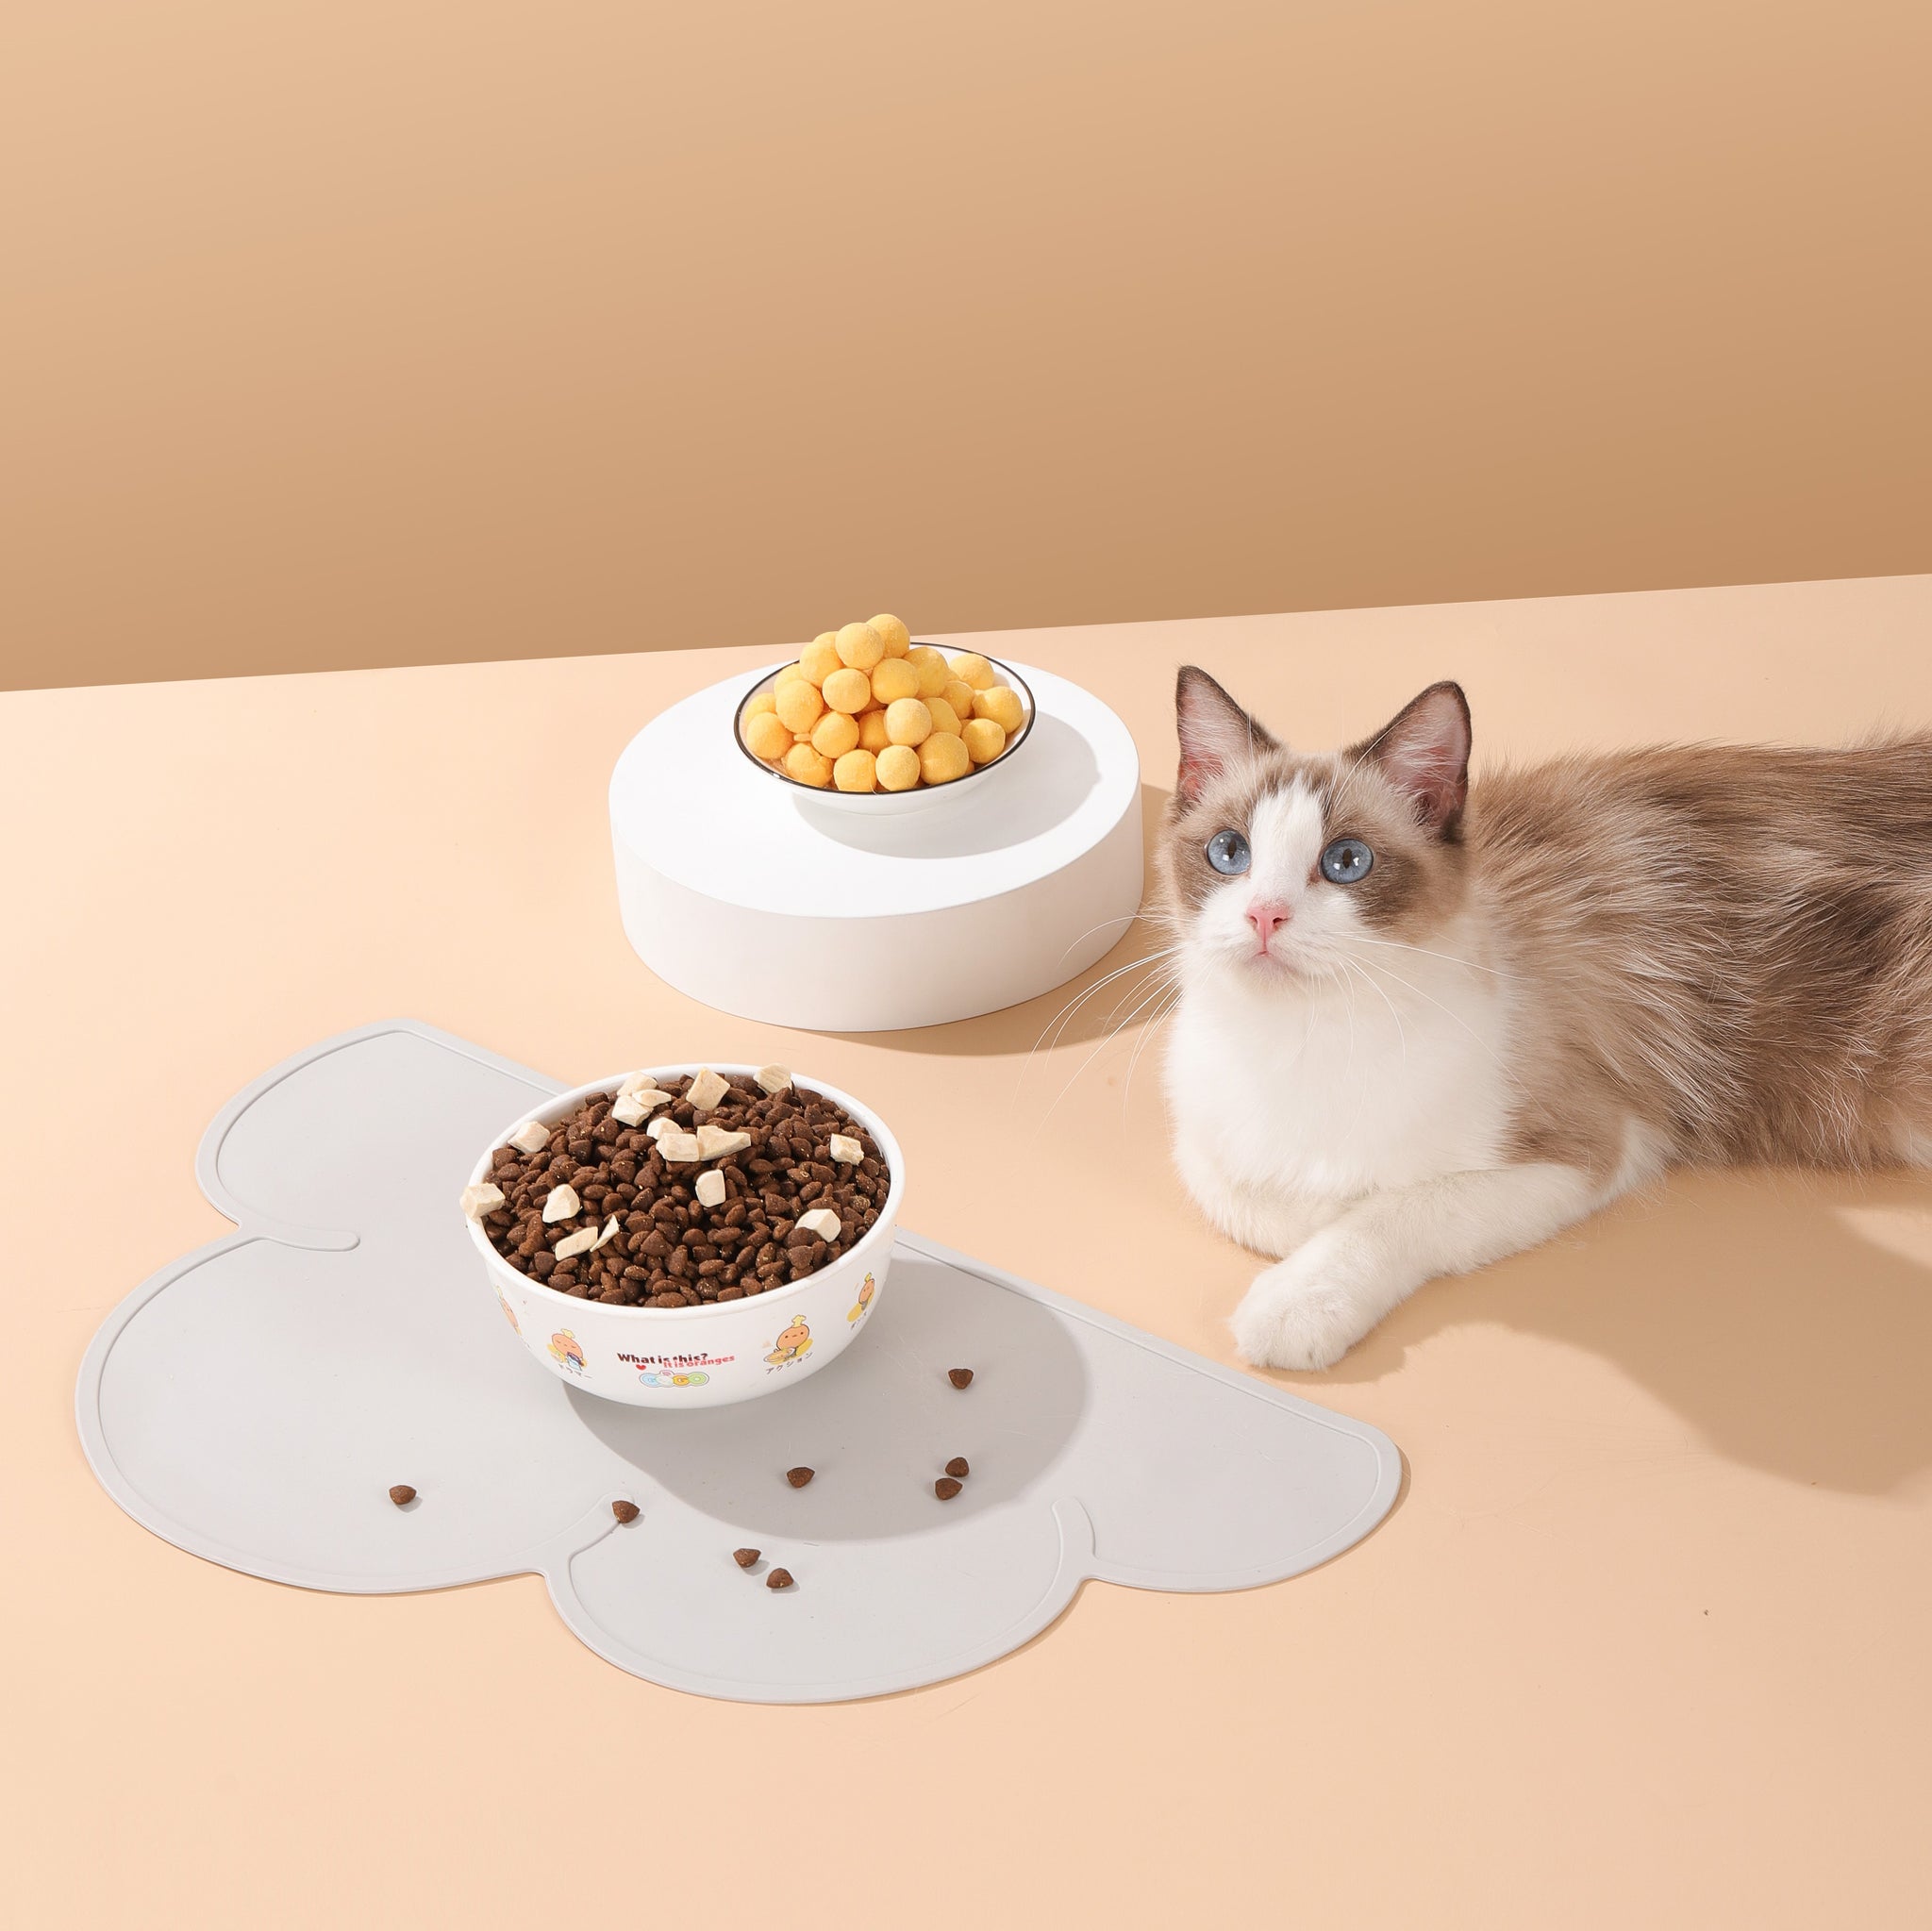 Cat & Dog Food Mat, Sillicone Waterproof Pet Bowl Placement Tray to Stop  Food Spills and Water Messes Out to Floor